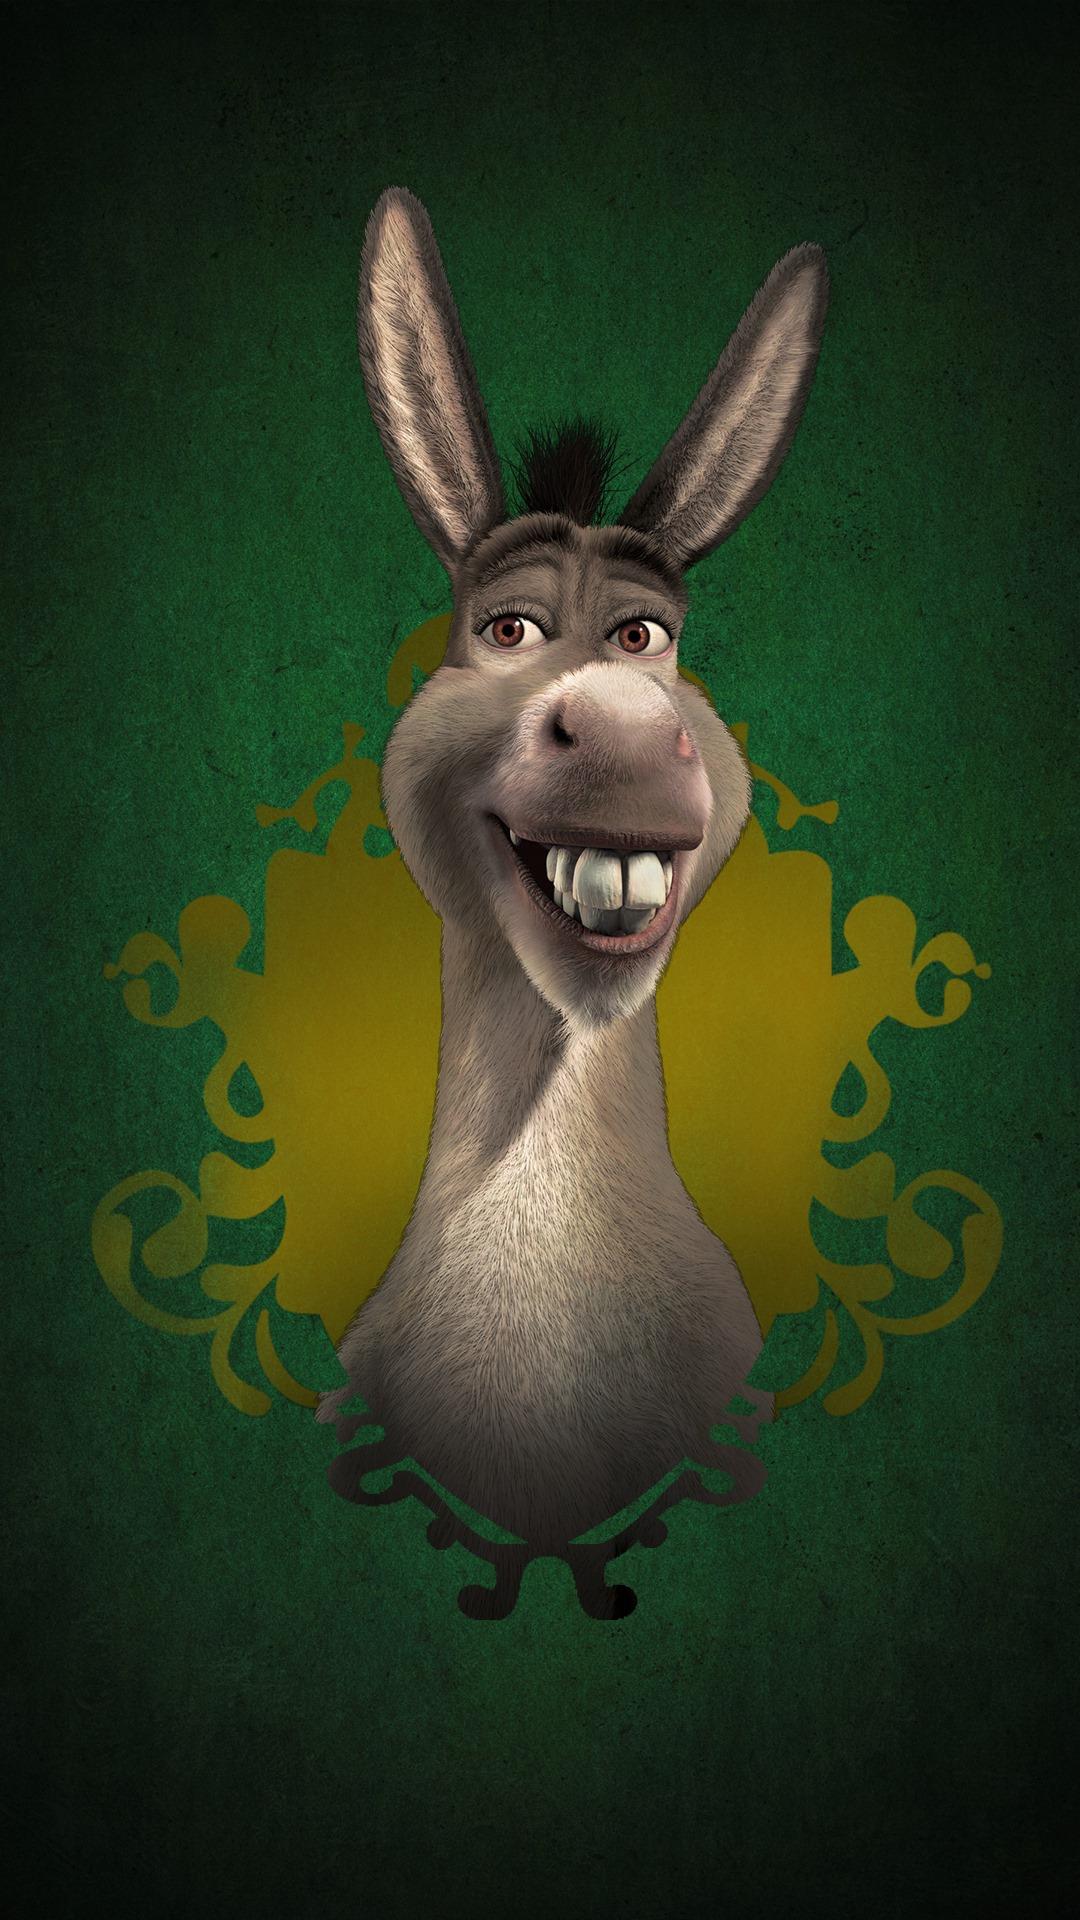 shrek and donkey wallpapers.